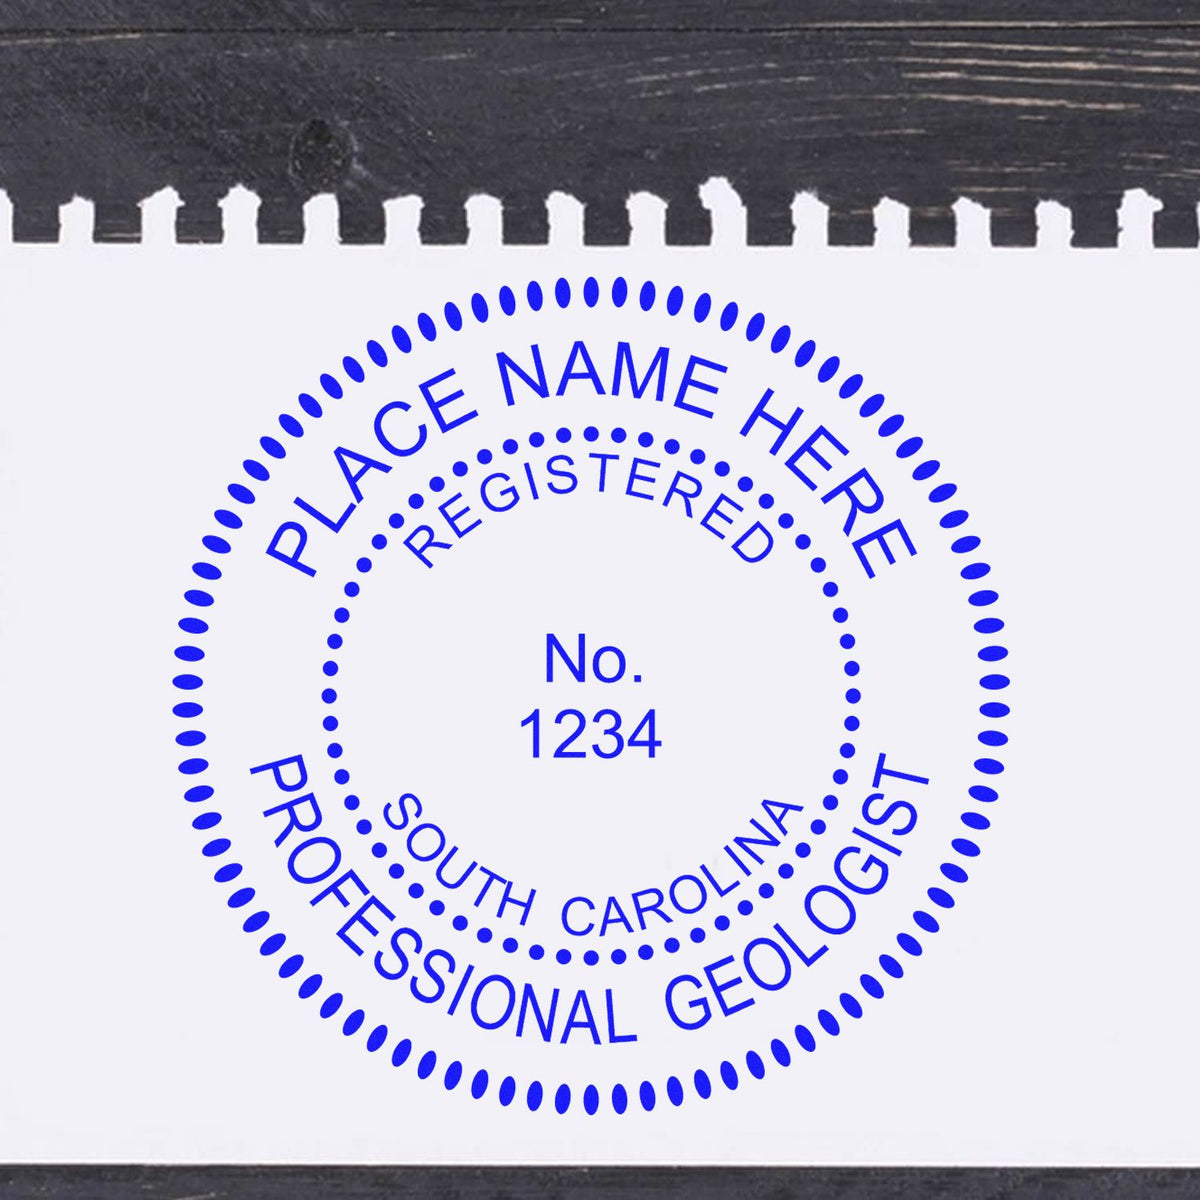 An alternative view of the South Carolina Professional Geologist Seal Stamp stamped on a sheet of paper showing the image in use